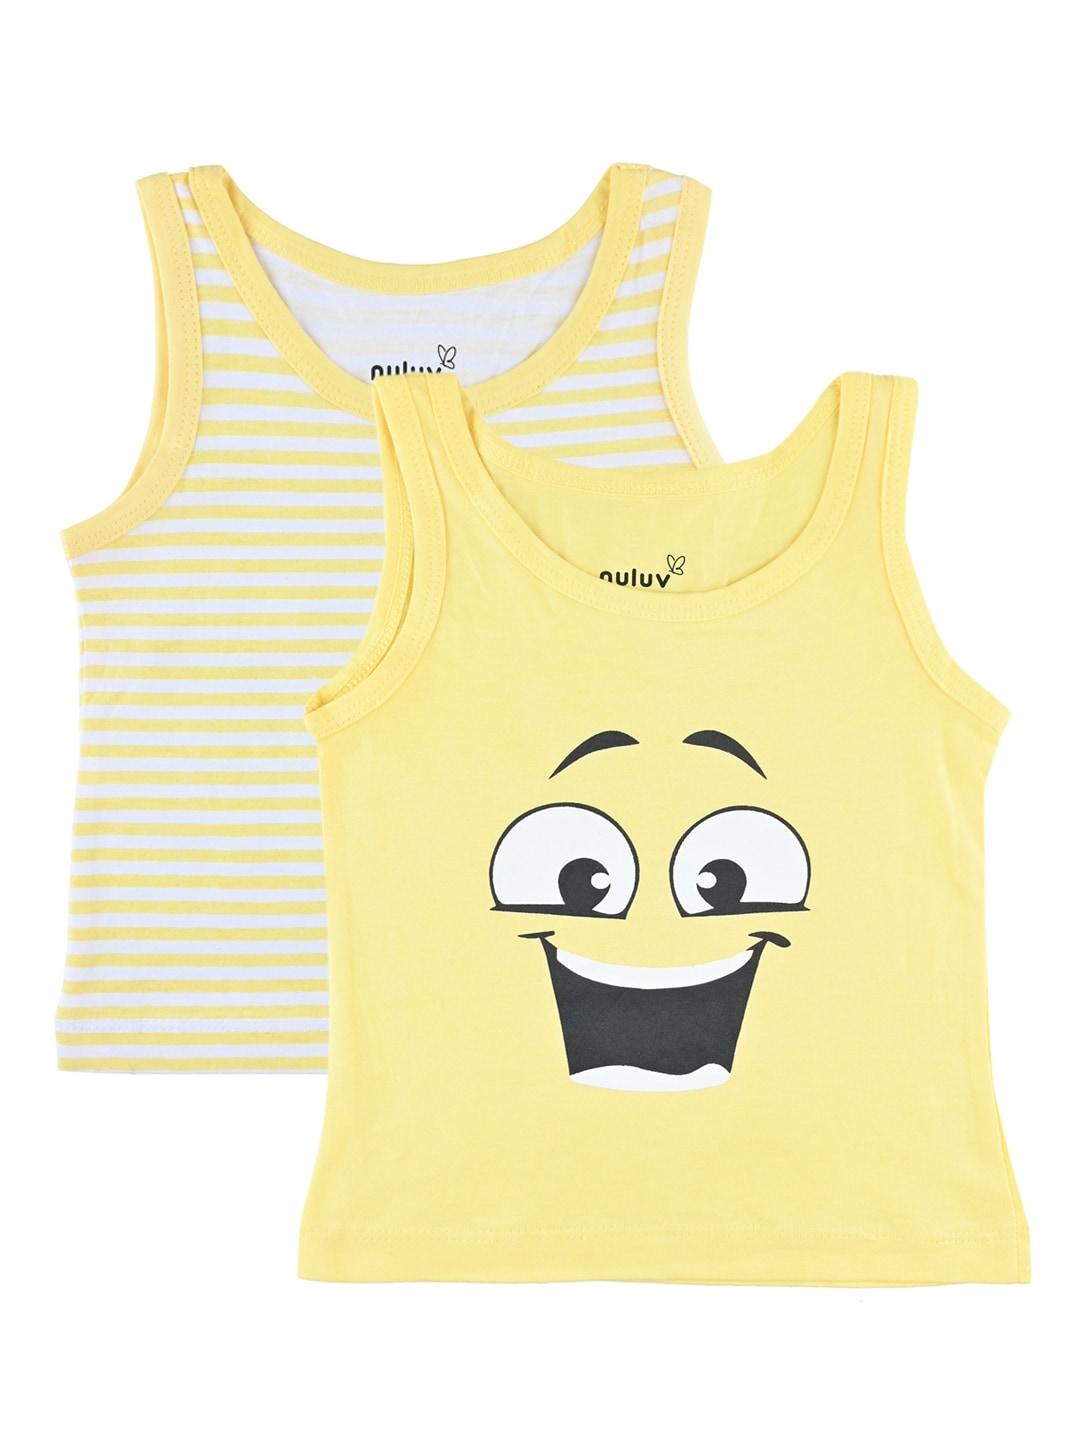 Nuluv Boys Pack of 2 Yellow & White Printed Cotton Innerwear Vests